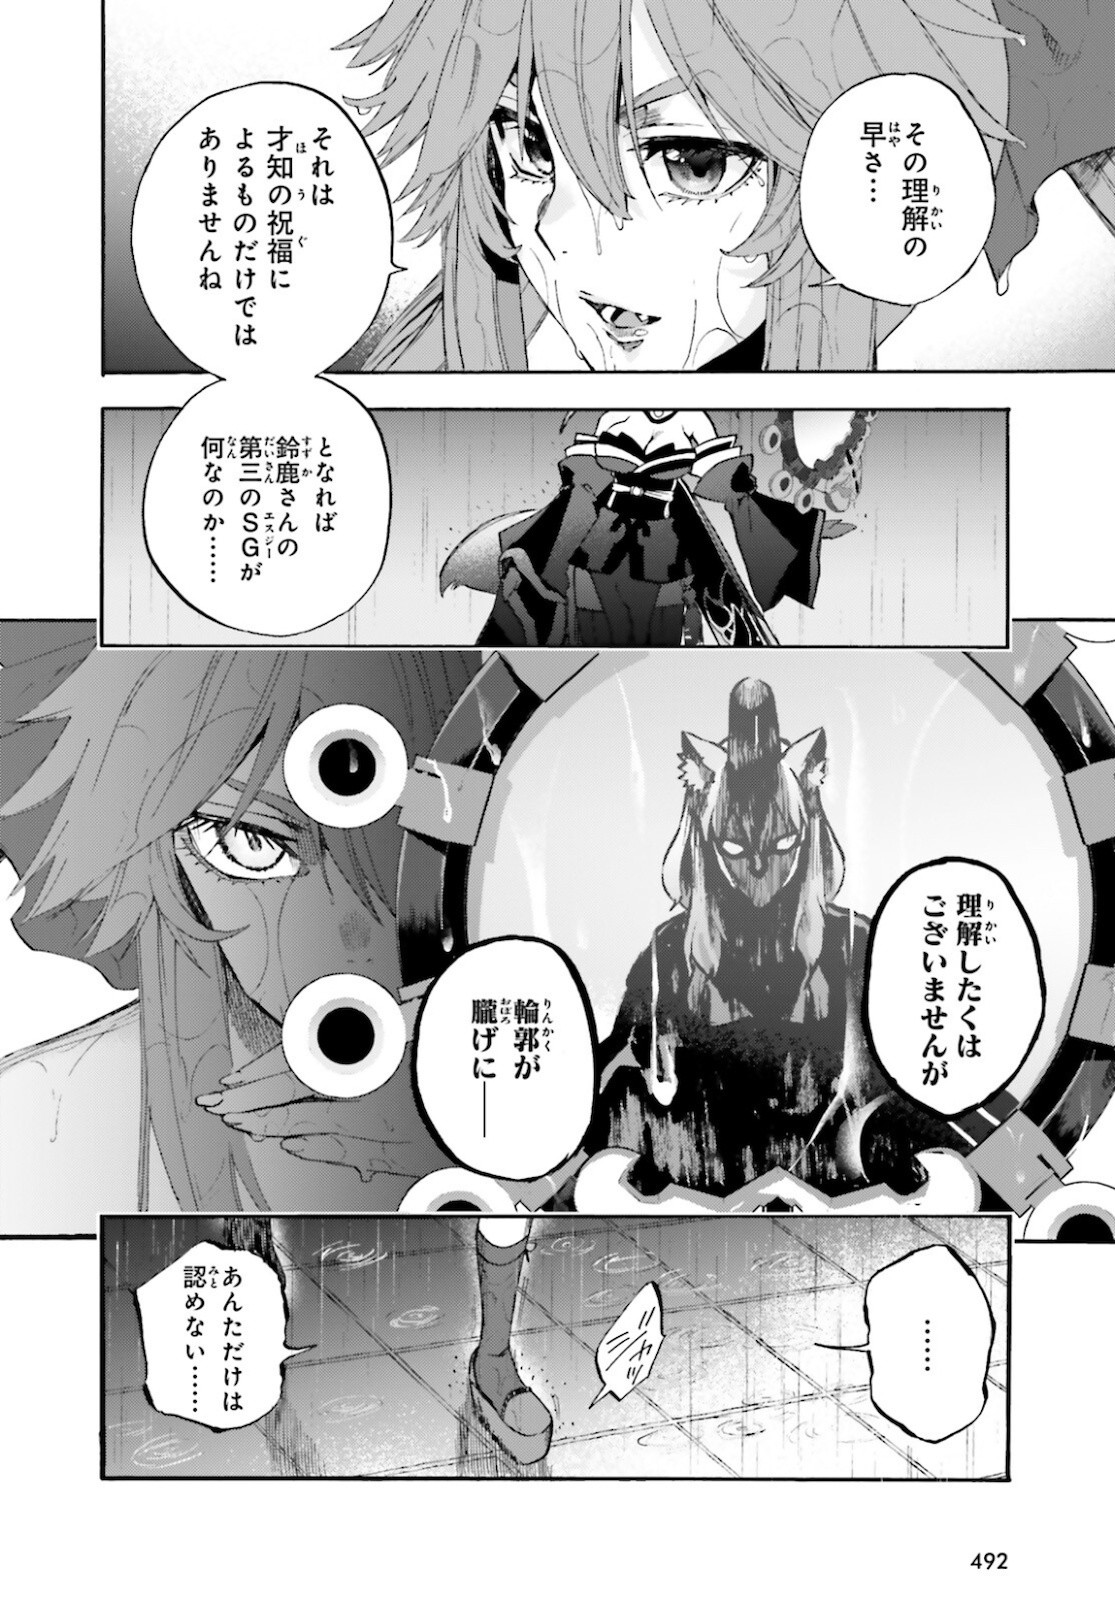 Fate/Extra CCC Fox Tail - Chapter 69 - Page 2